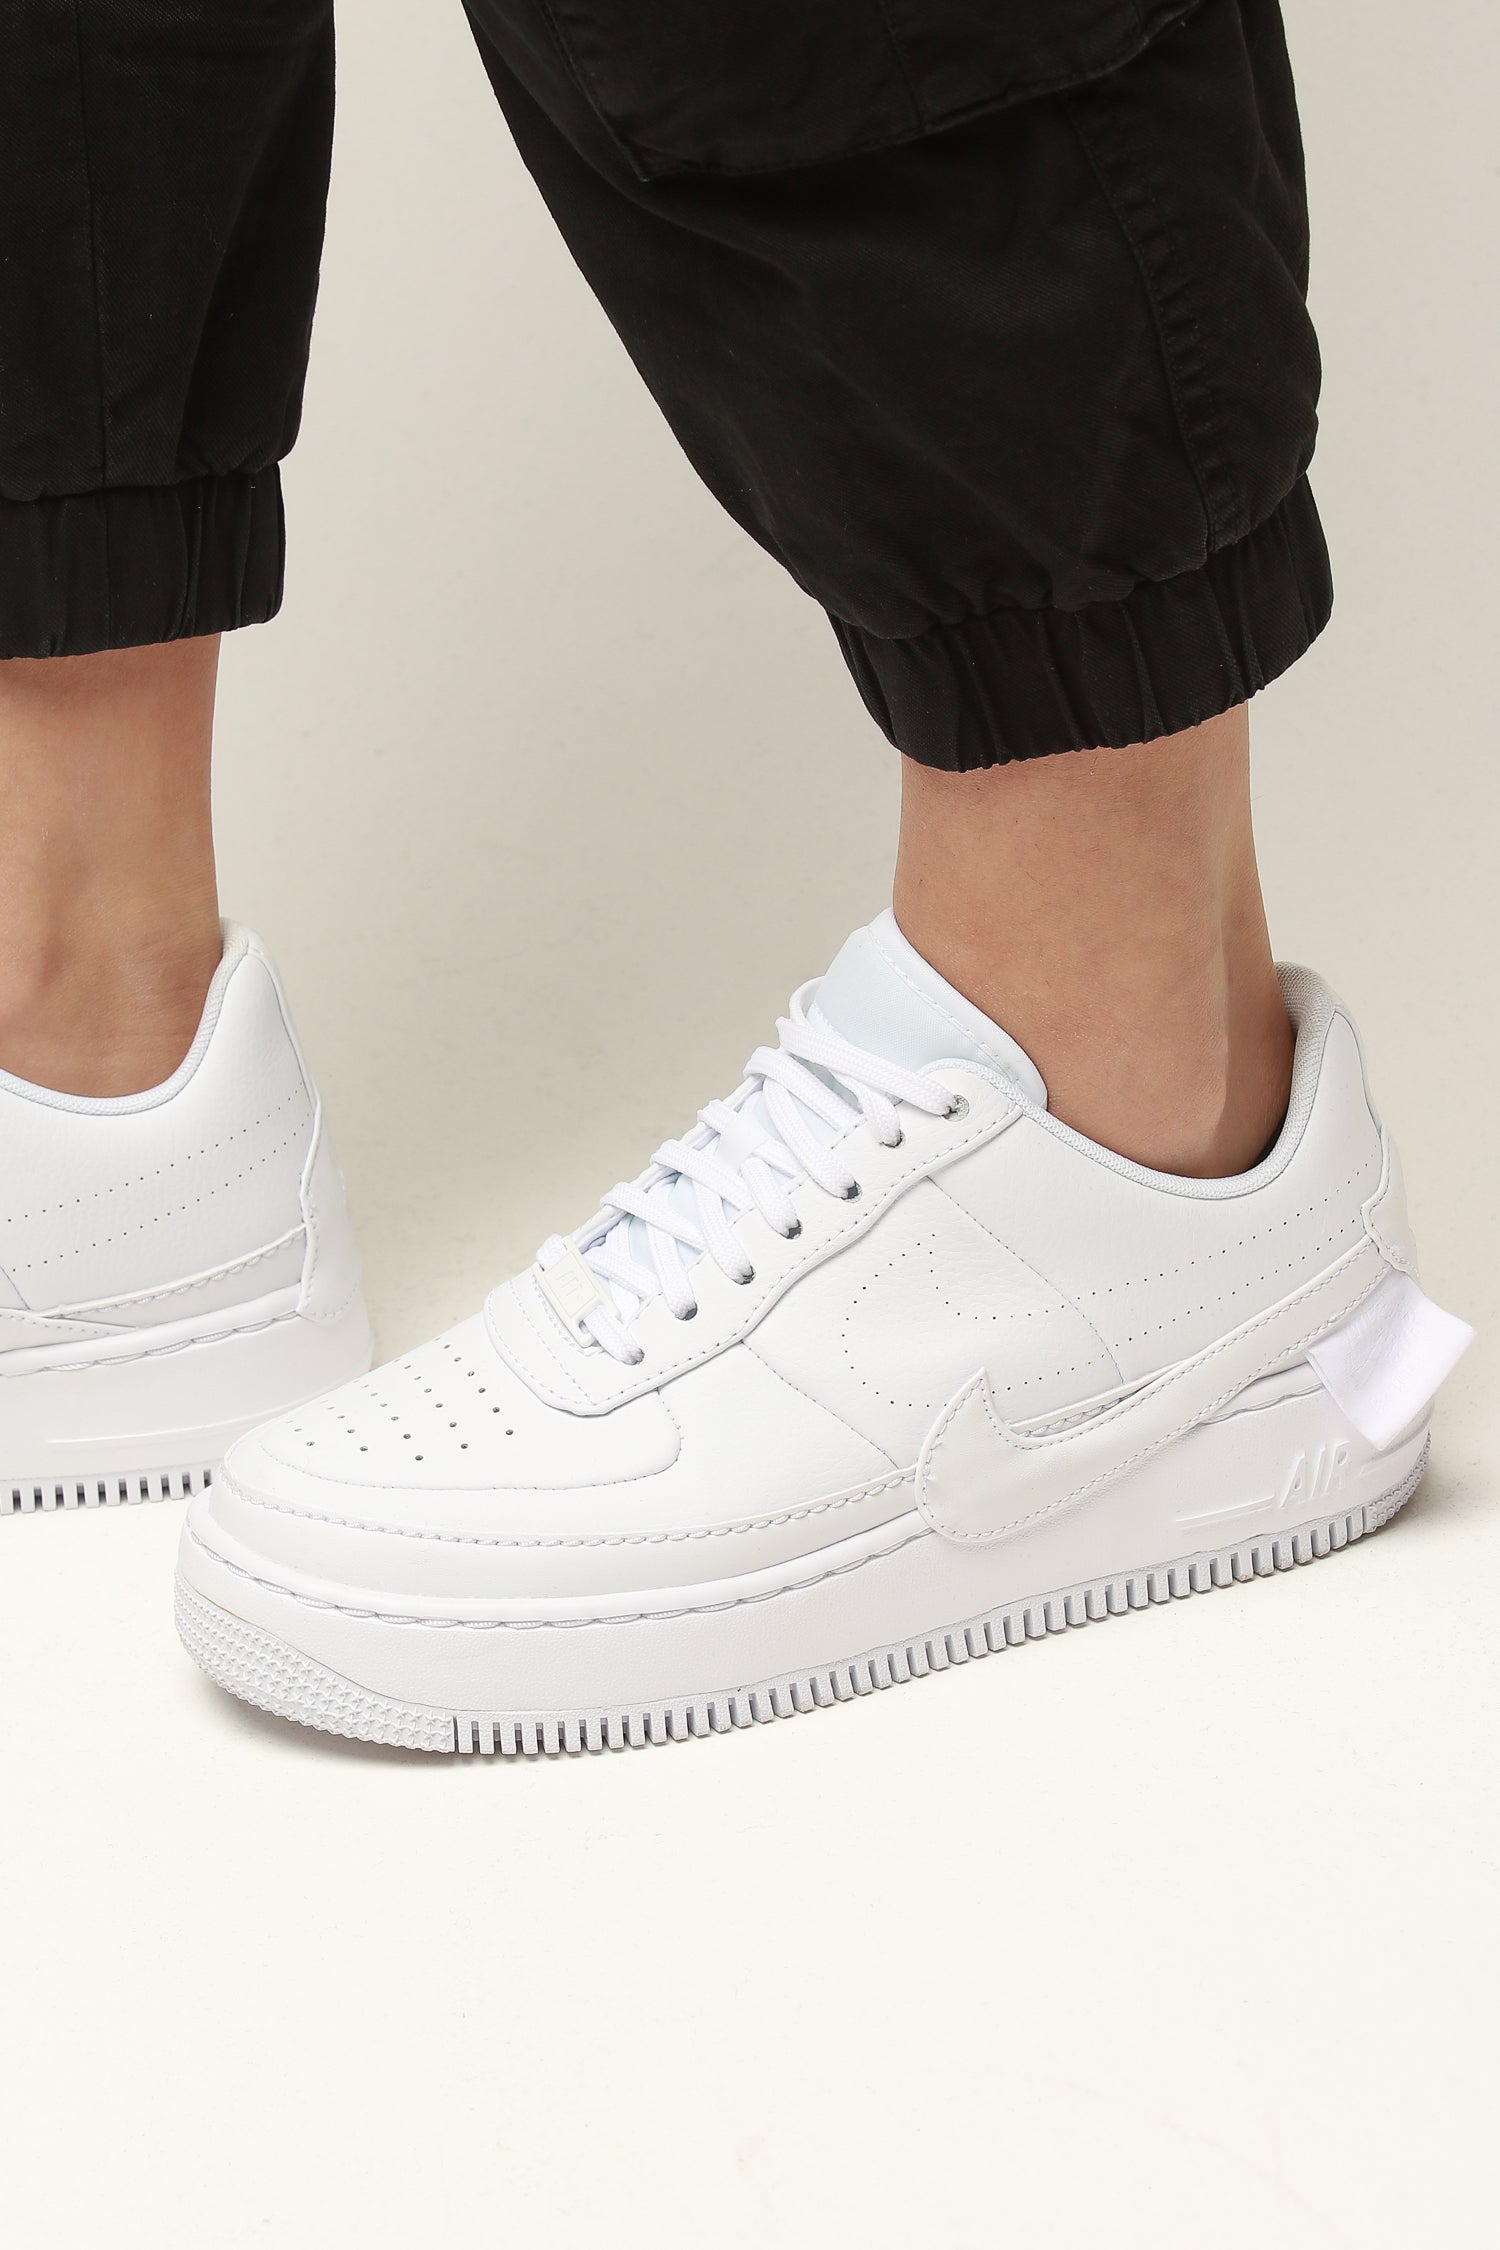 air force 1 jester white